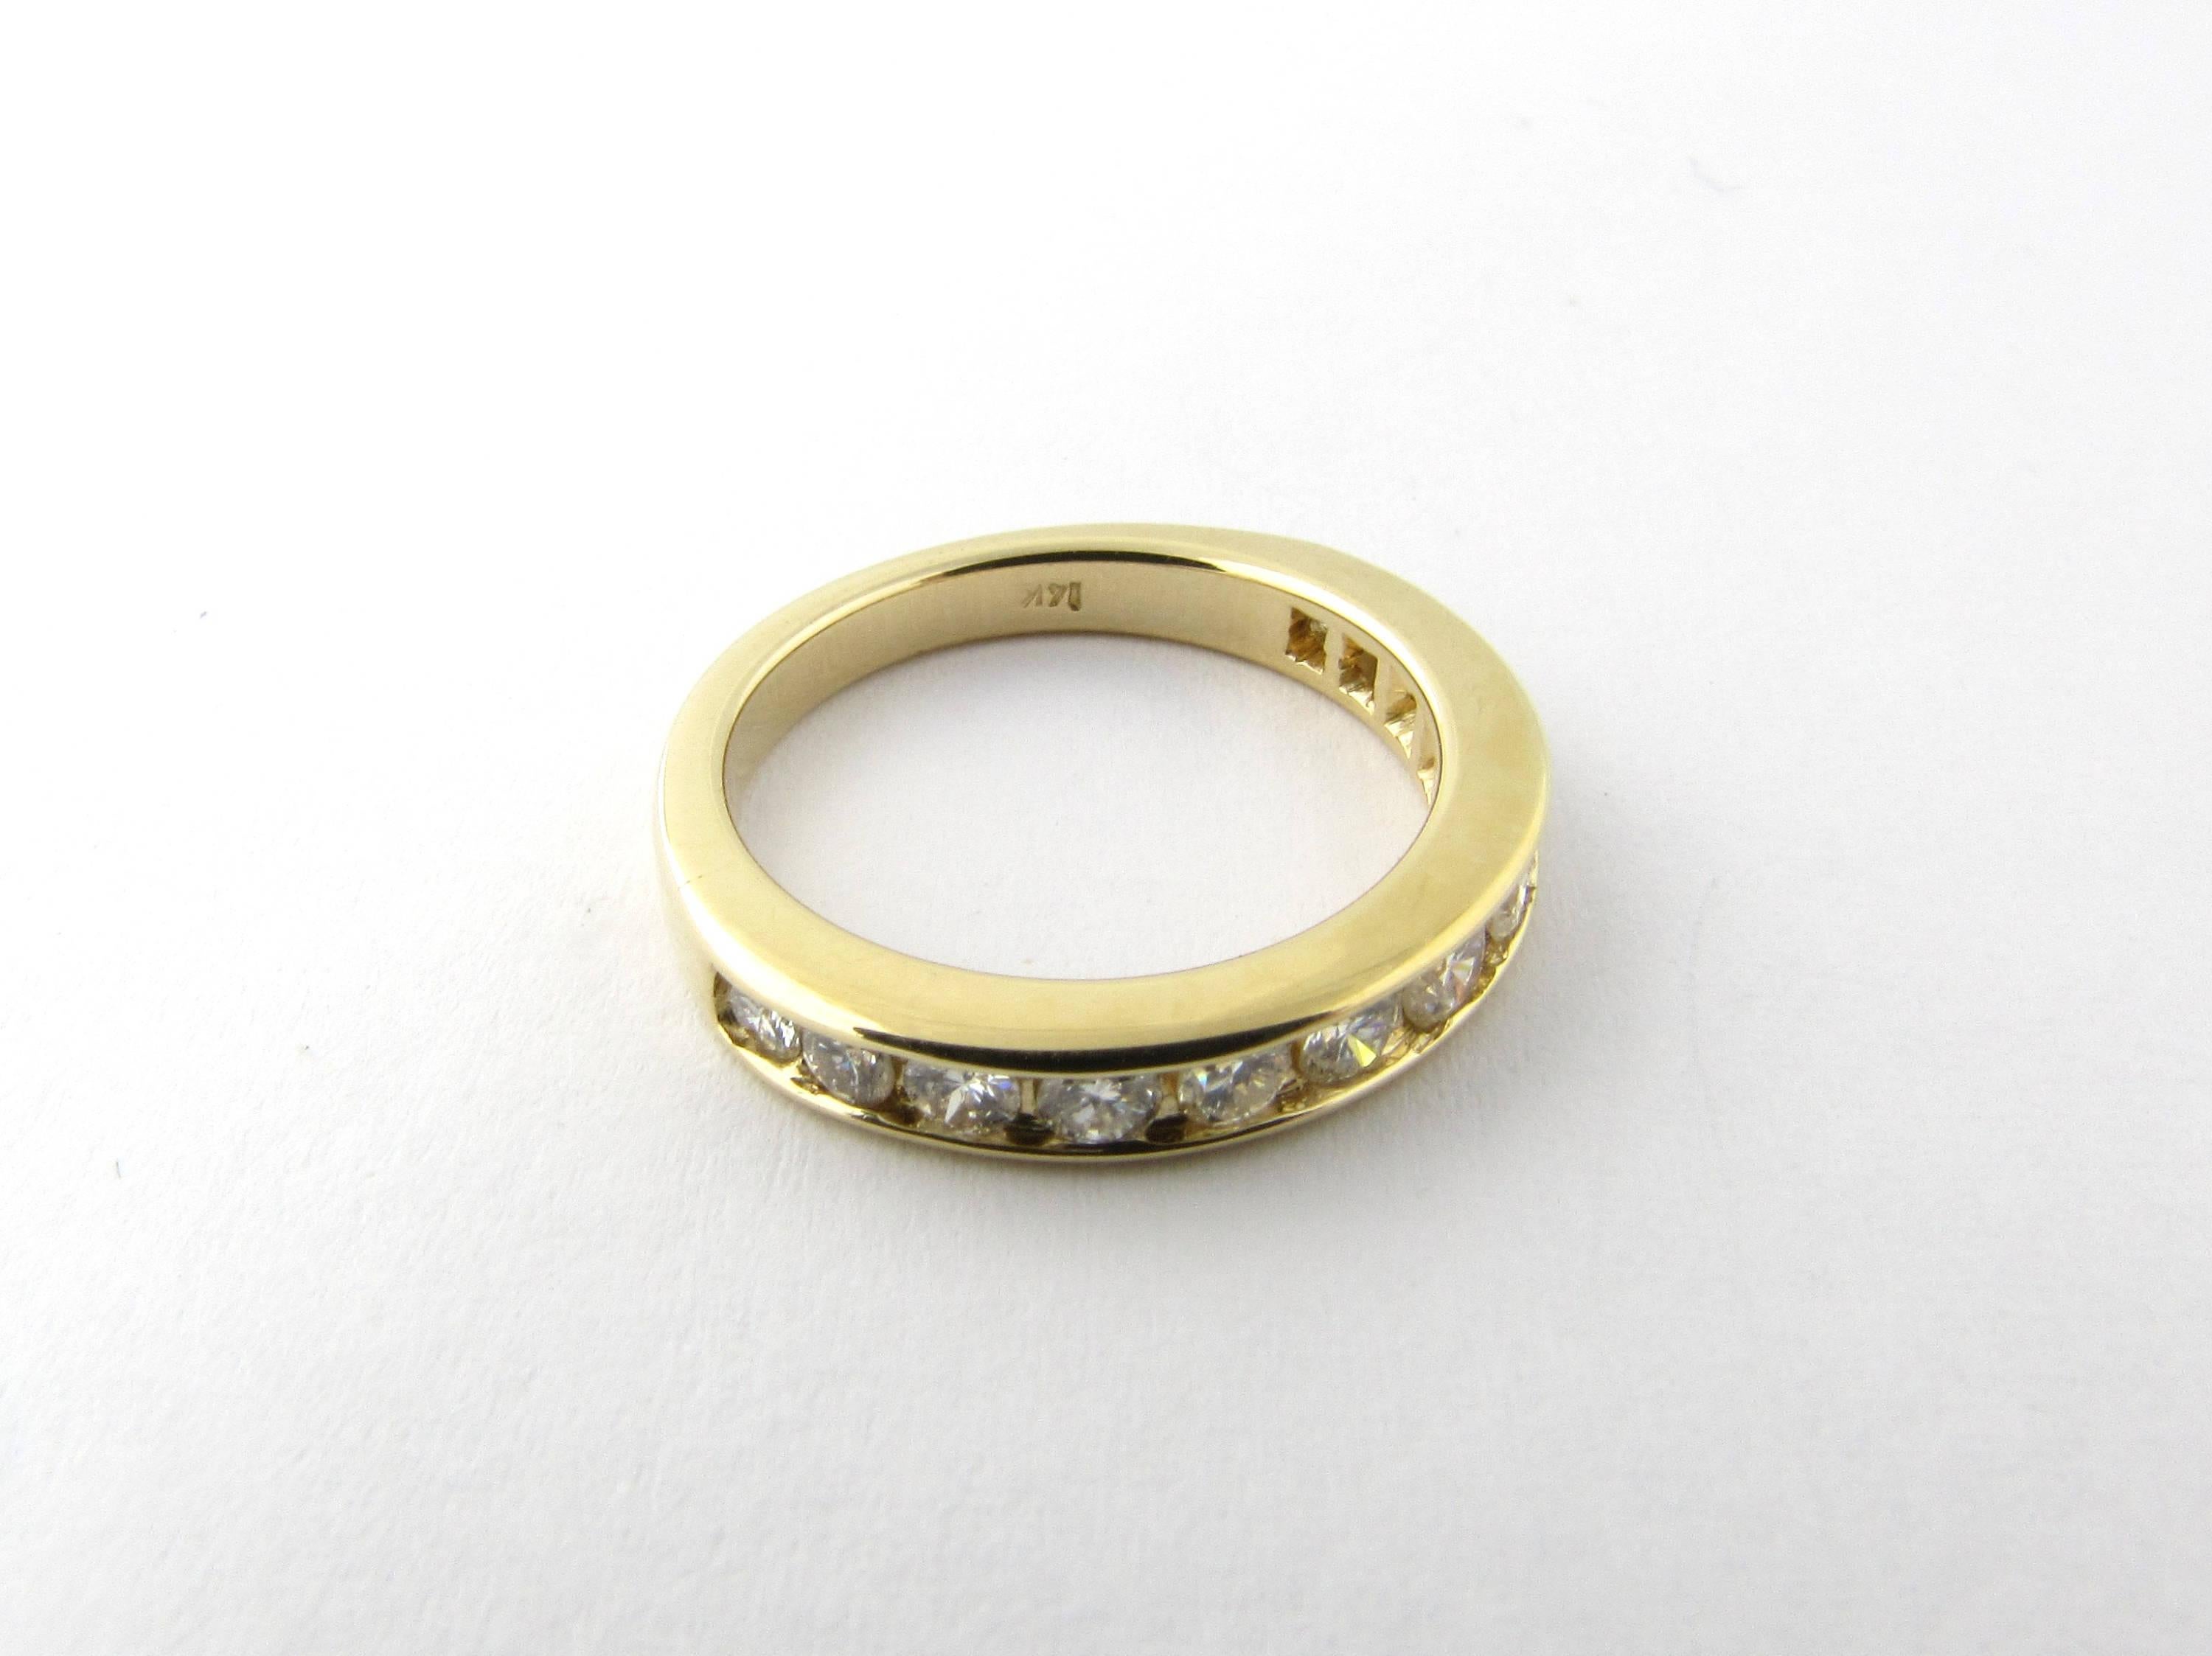 Vintage 14 Karat Yellow Gold Diamond Wedding Band Size 4.5
This sparkling wedding band features 13 round brilliant cut diamonds set in polished 14K yellow gold. 
Approximate total diamond weight: .30 ct. 
Diamond color: J 
Diamond clarity: VS2 
Ring